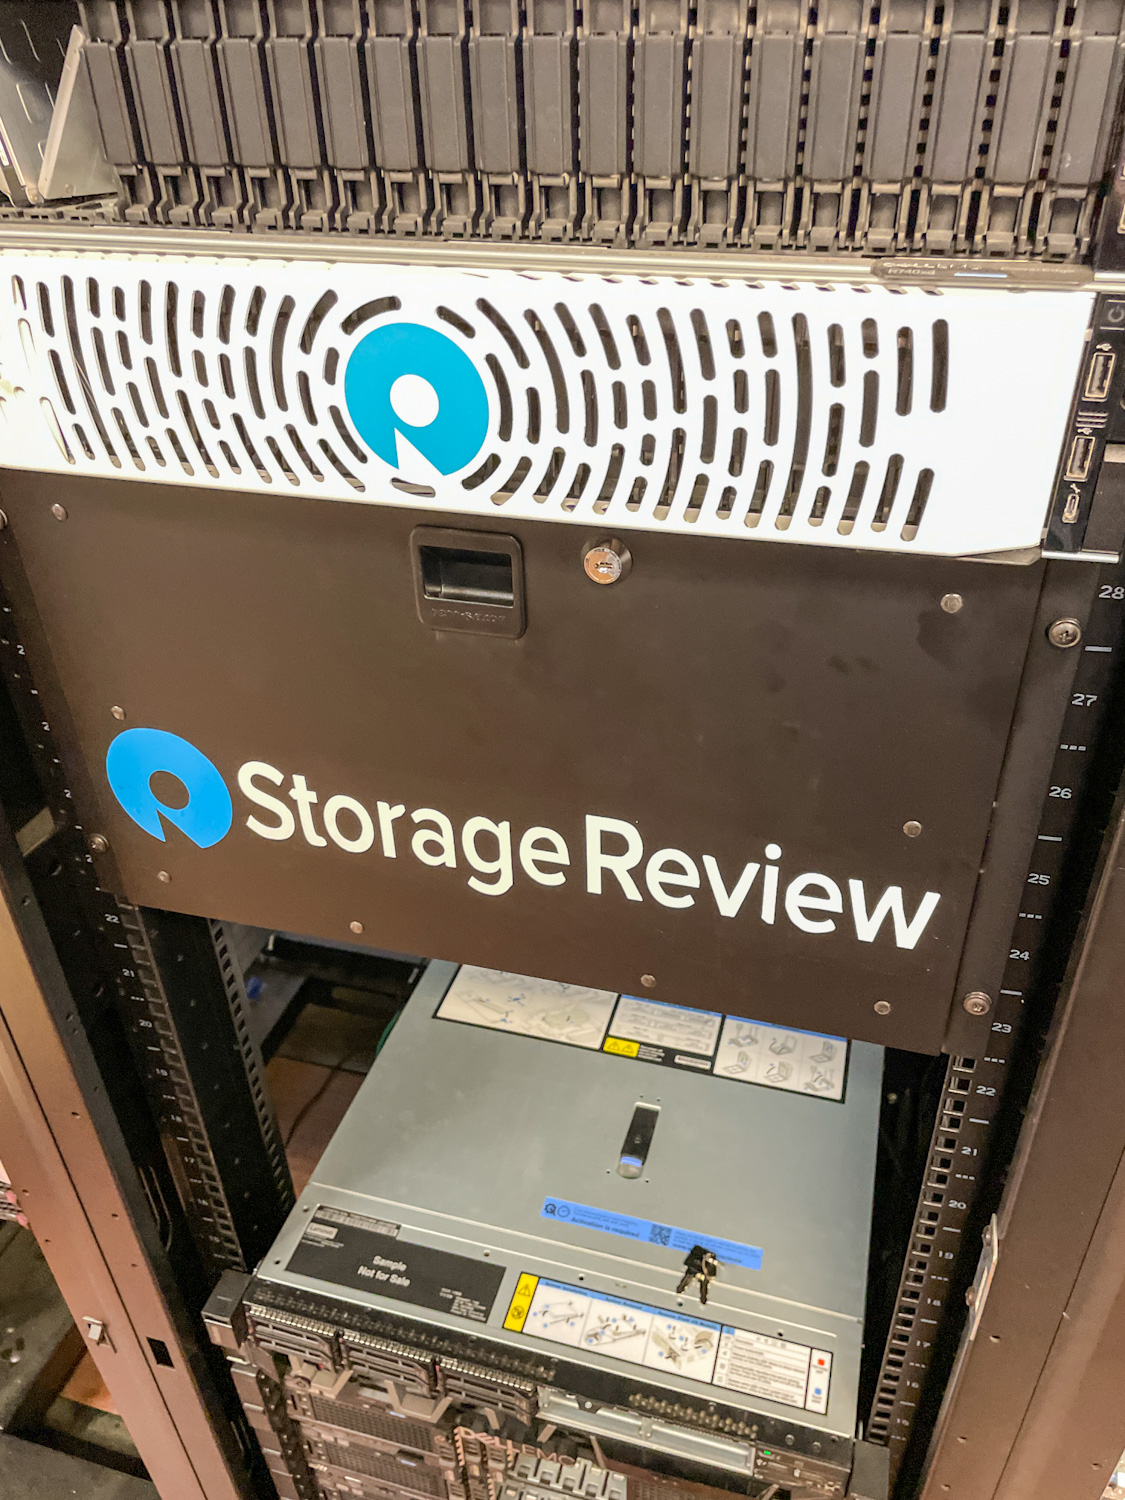 StorageReview IT HelpDesk